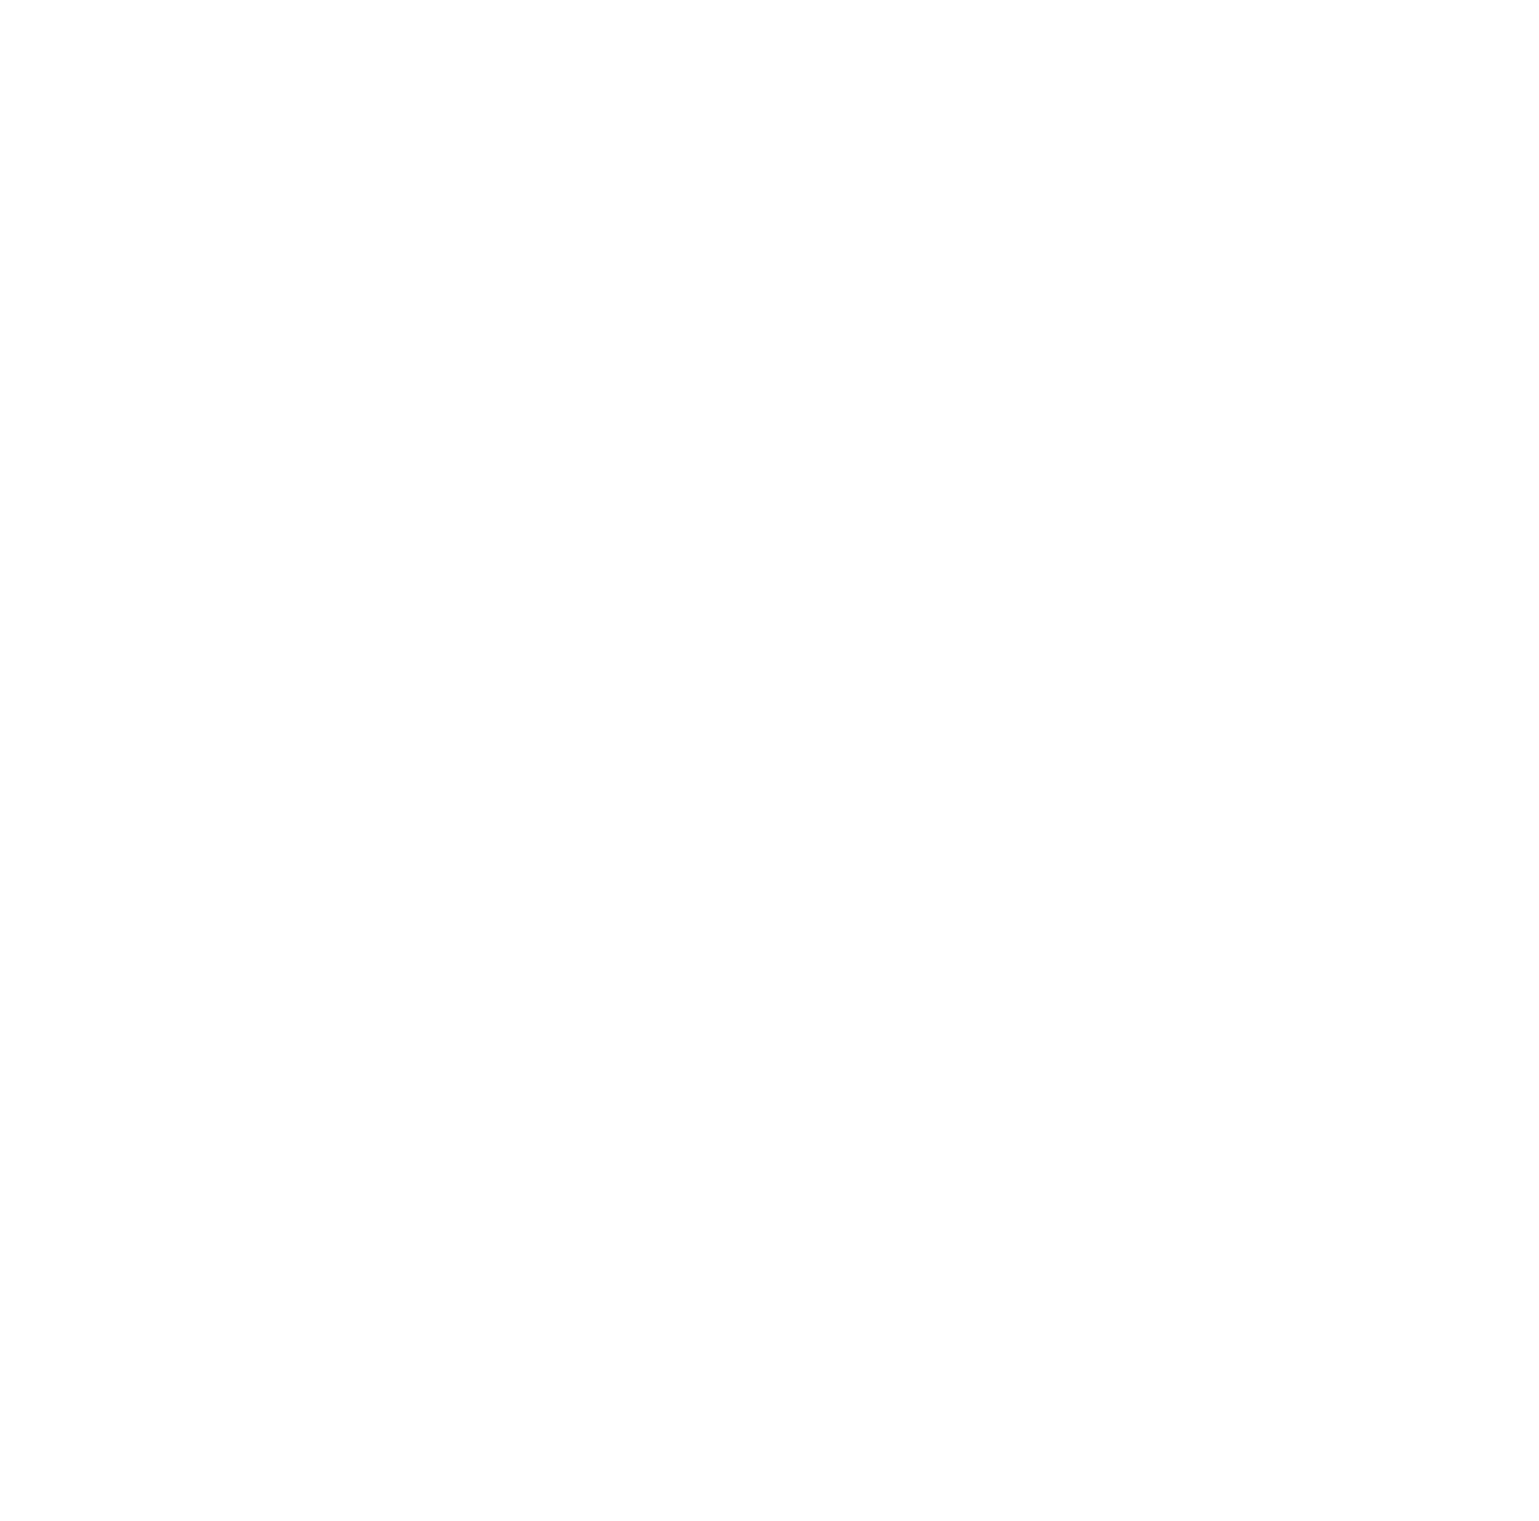 A2A logo for dark backgrounds (transparent PNG)